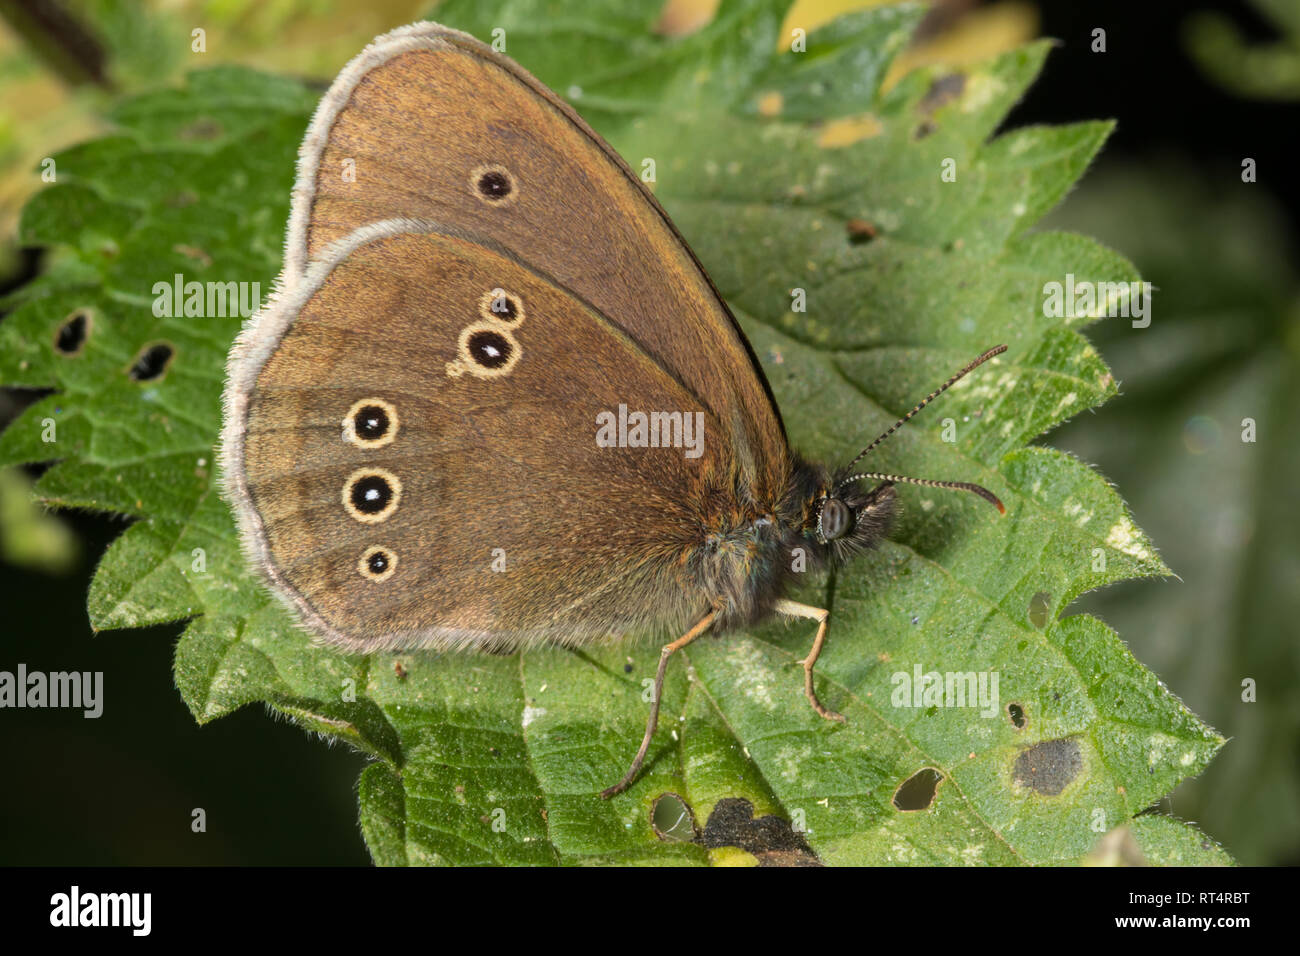 A Ringlet butterfly (Aphantopus hyperantus) from the family Nymphalidae, perching on a stinging nettle leaf. Stock Photo